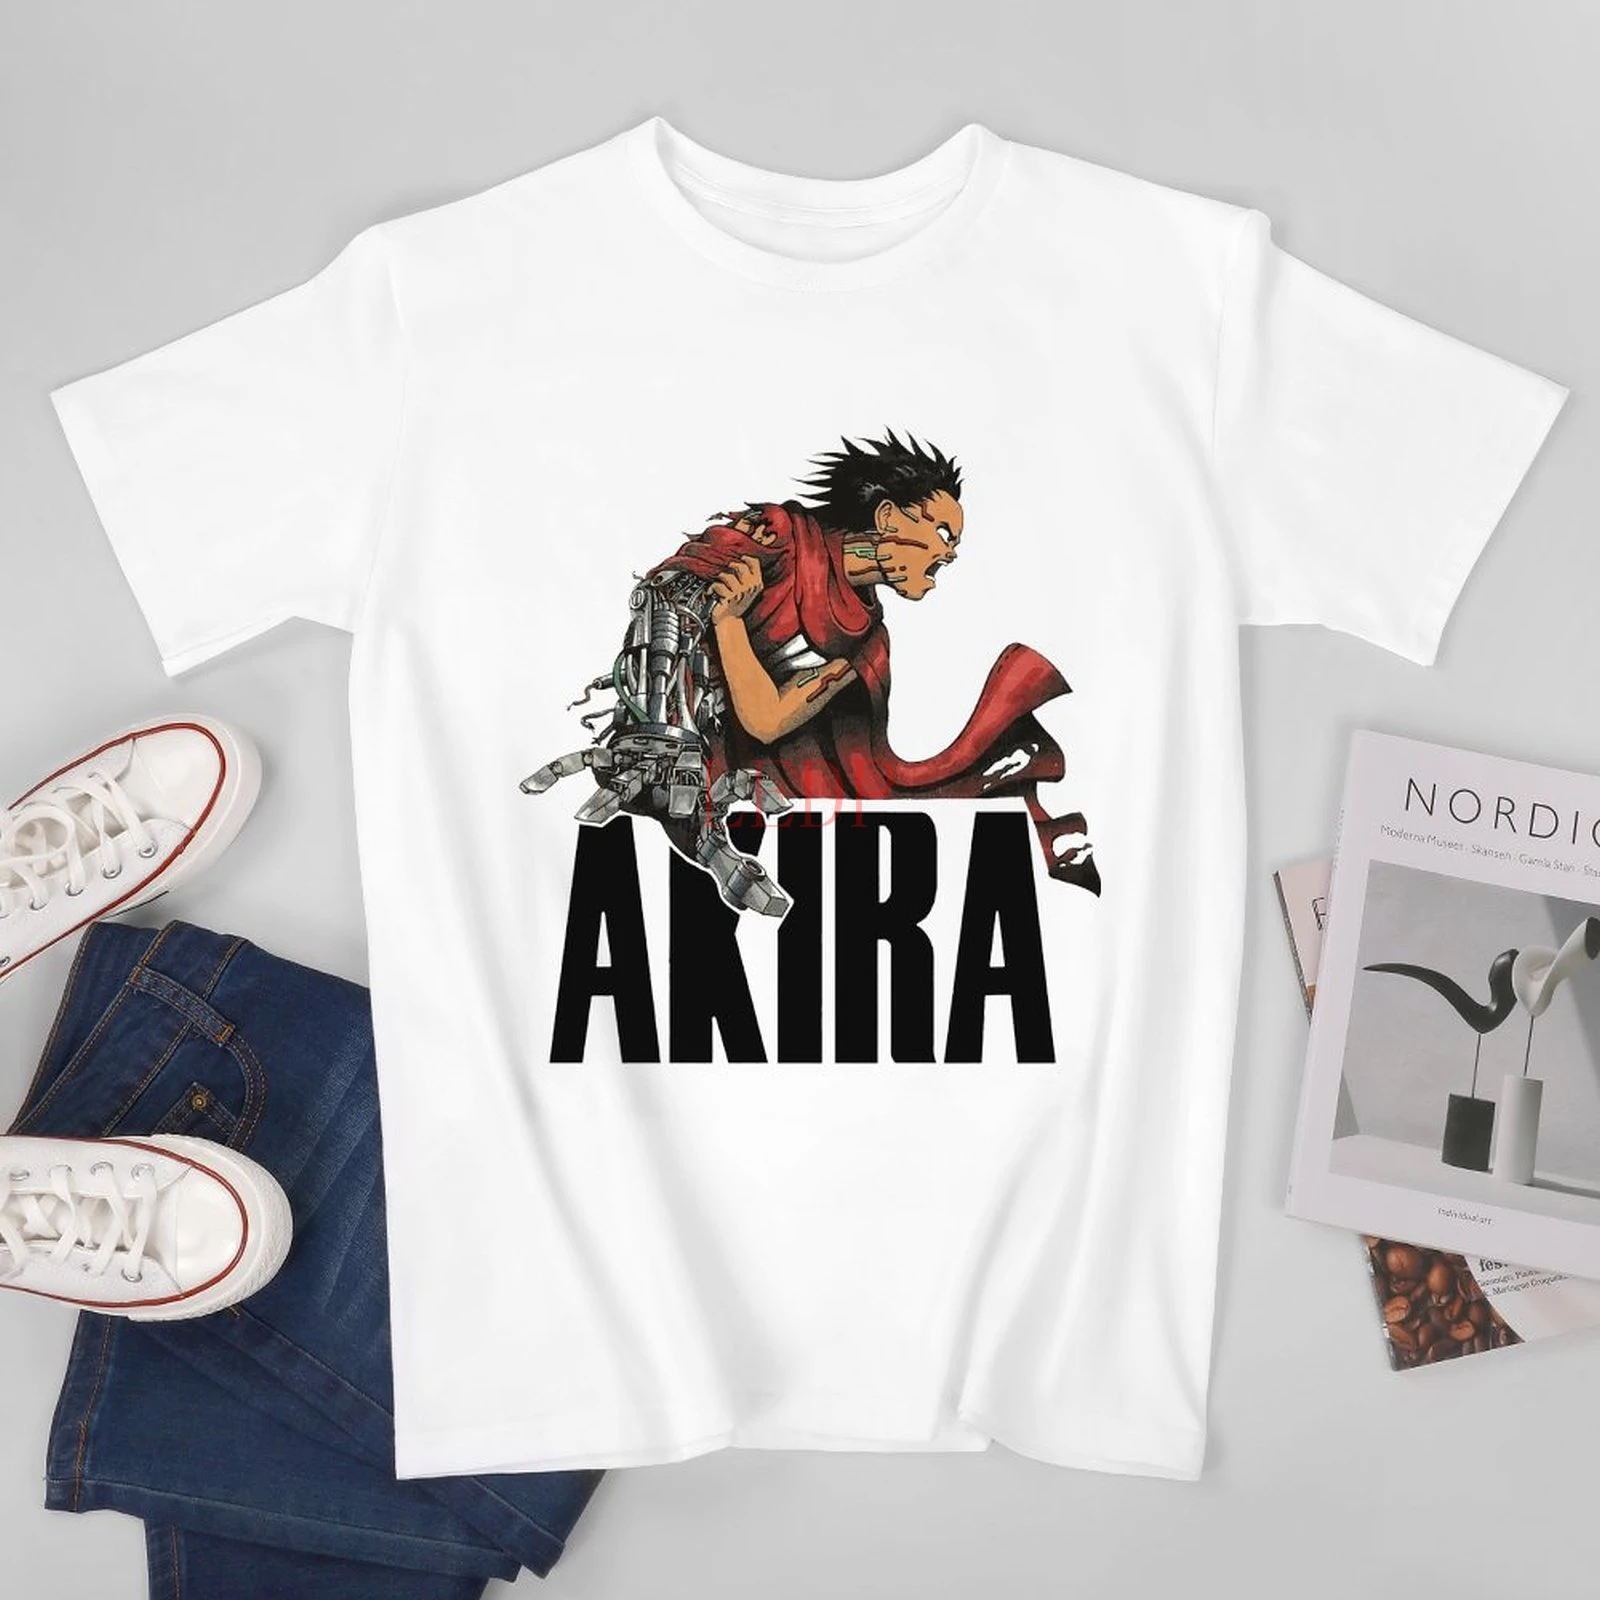 Newest Letter Print Vtg 1988 Akira Shirt Fashion Victim Ghost In The Shell Evangelion Usa Size T-Shirt Casual Man Tees